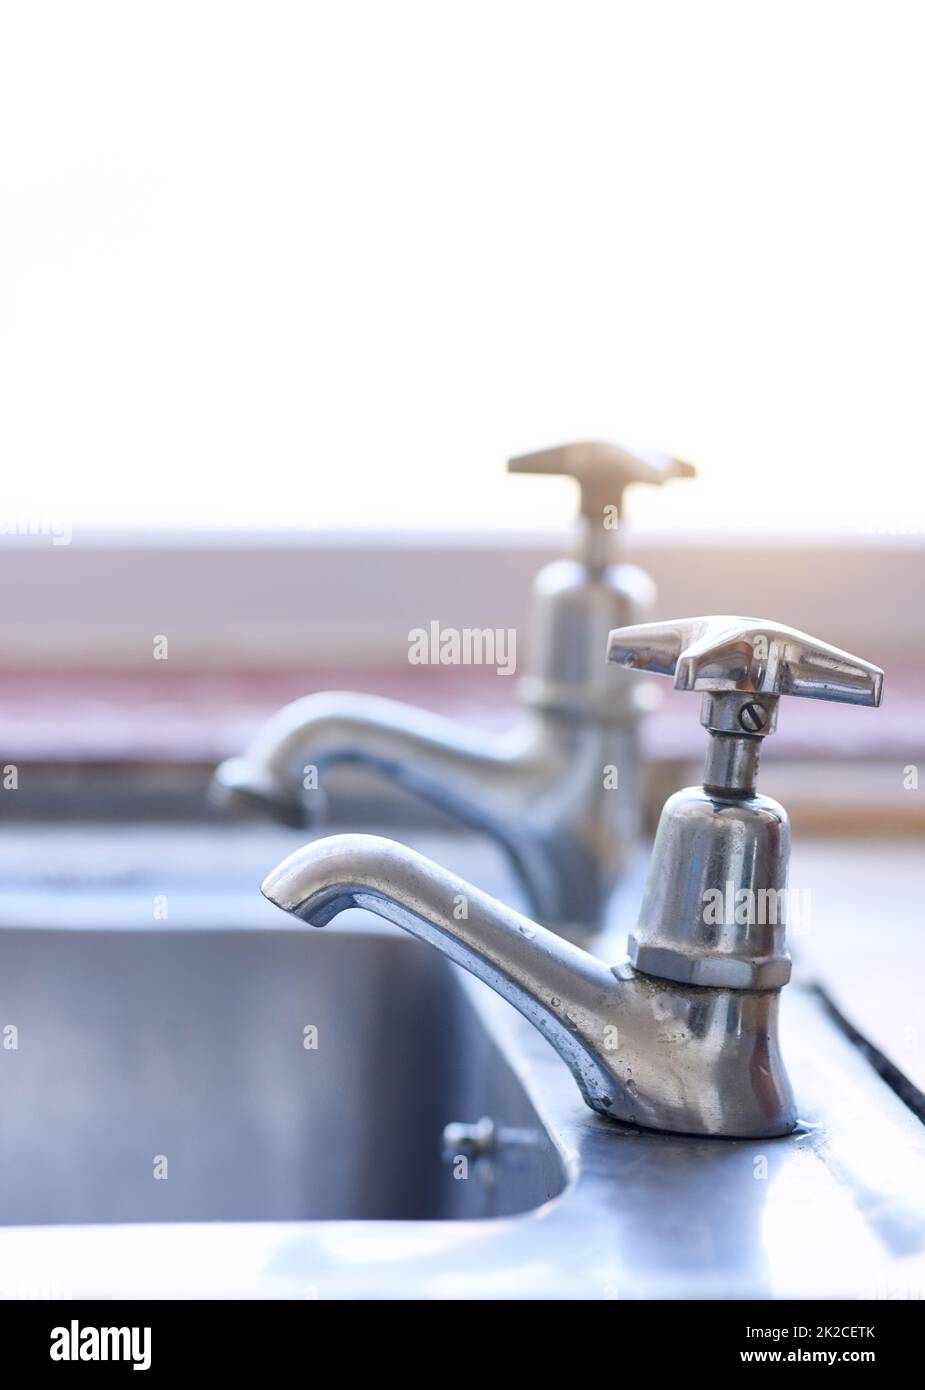 Water is in short supply. Shot of two dripping taps waisting a little bit of water in a basin inside of a house during the day. Stock Photo